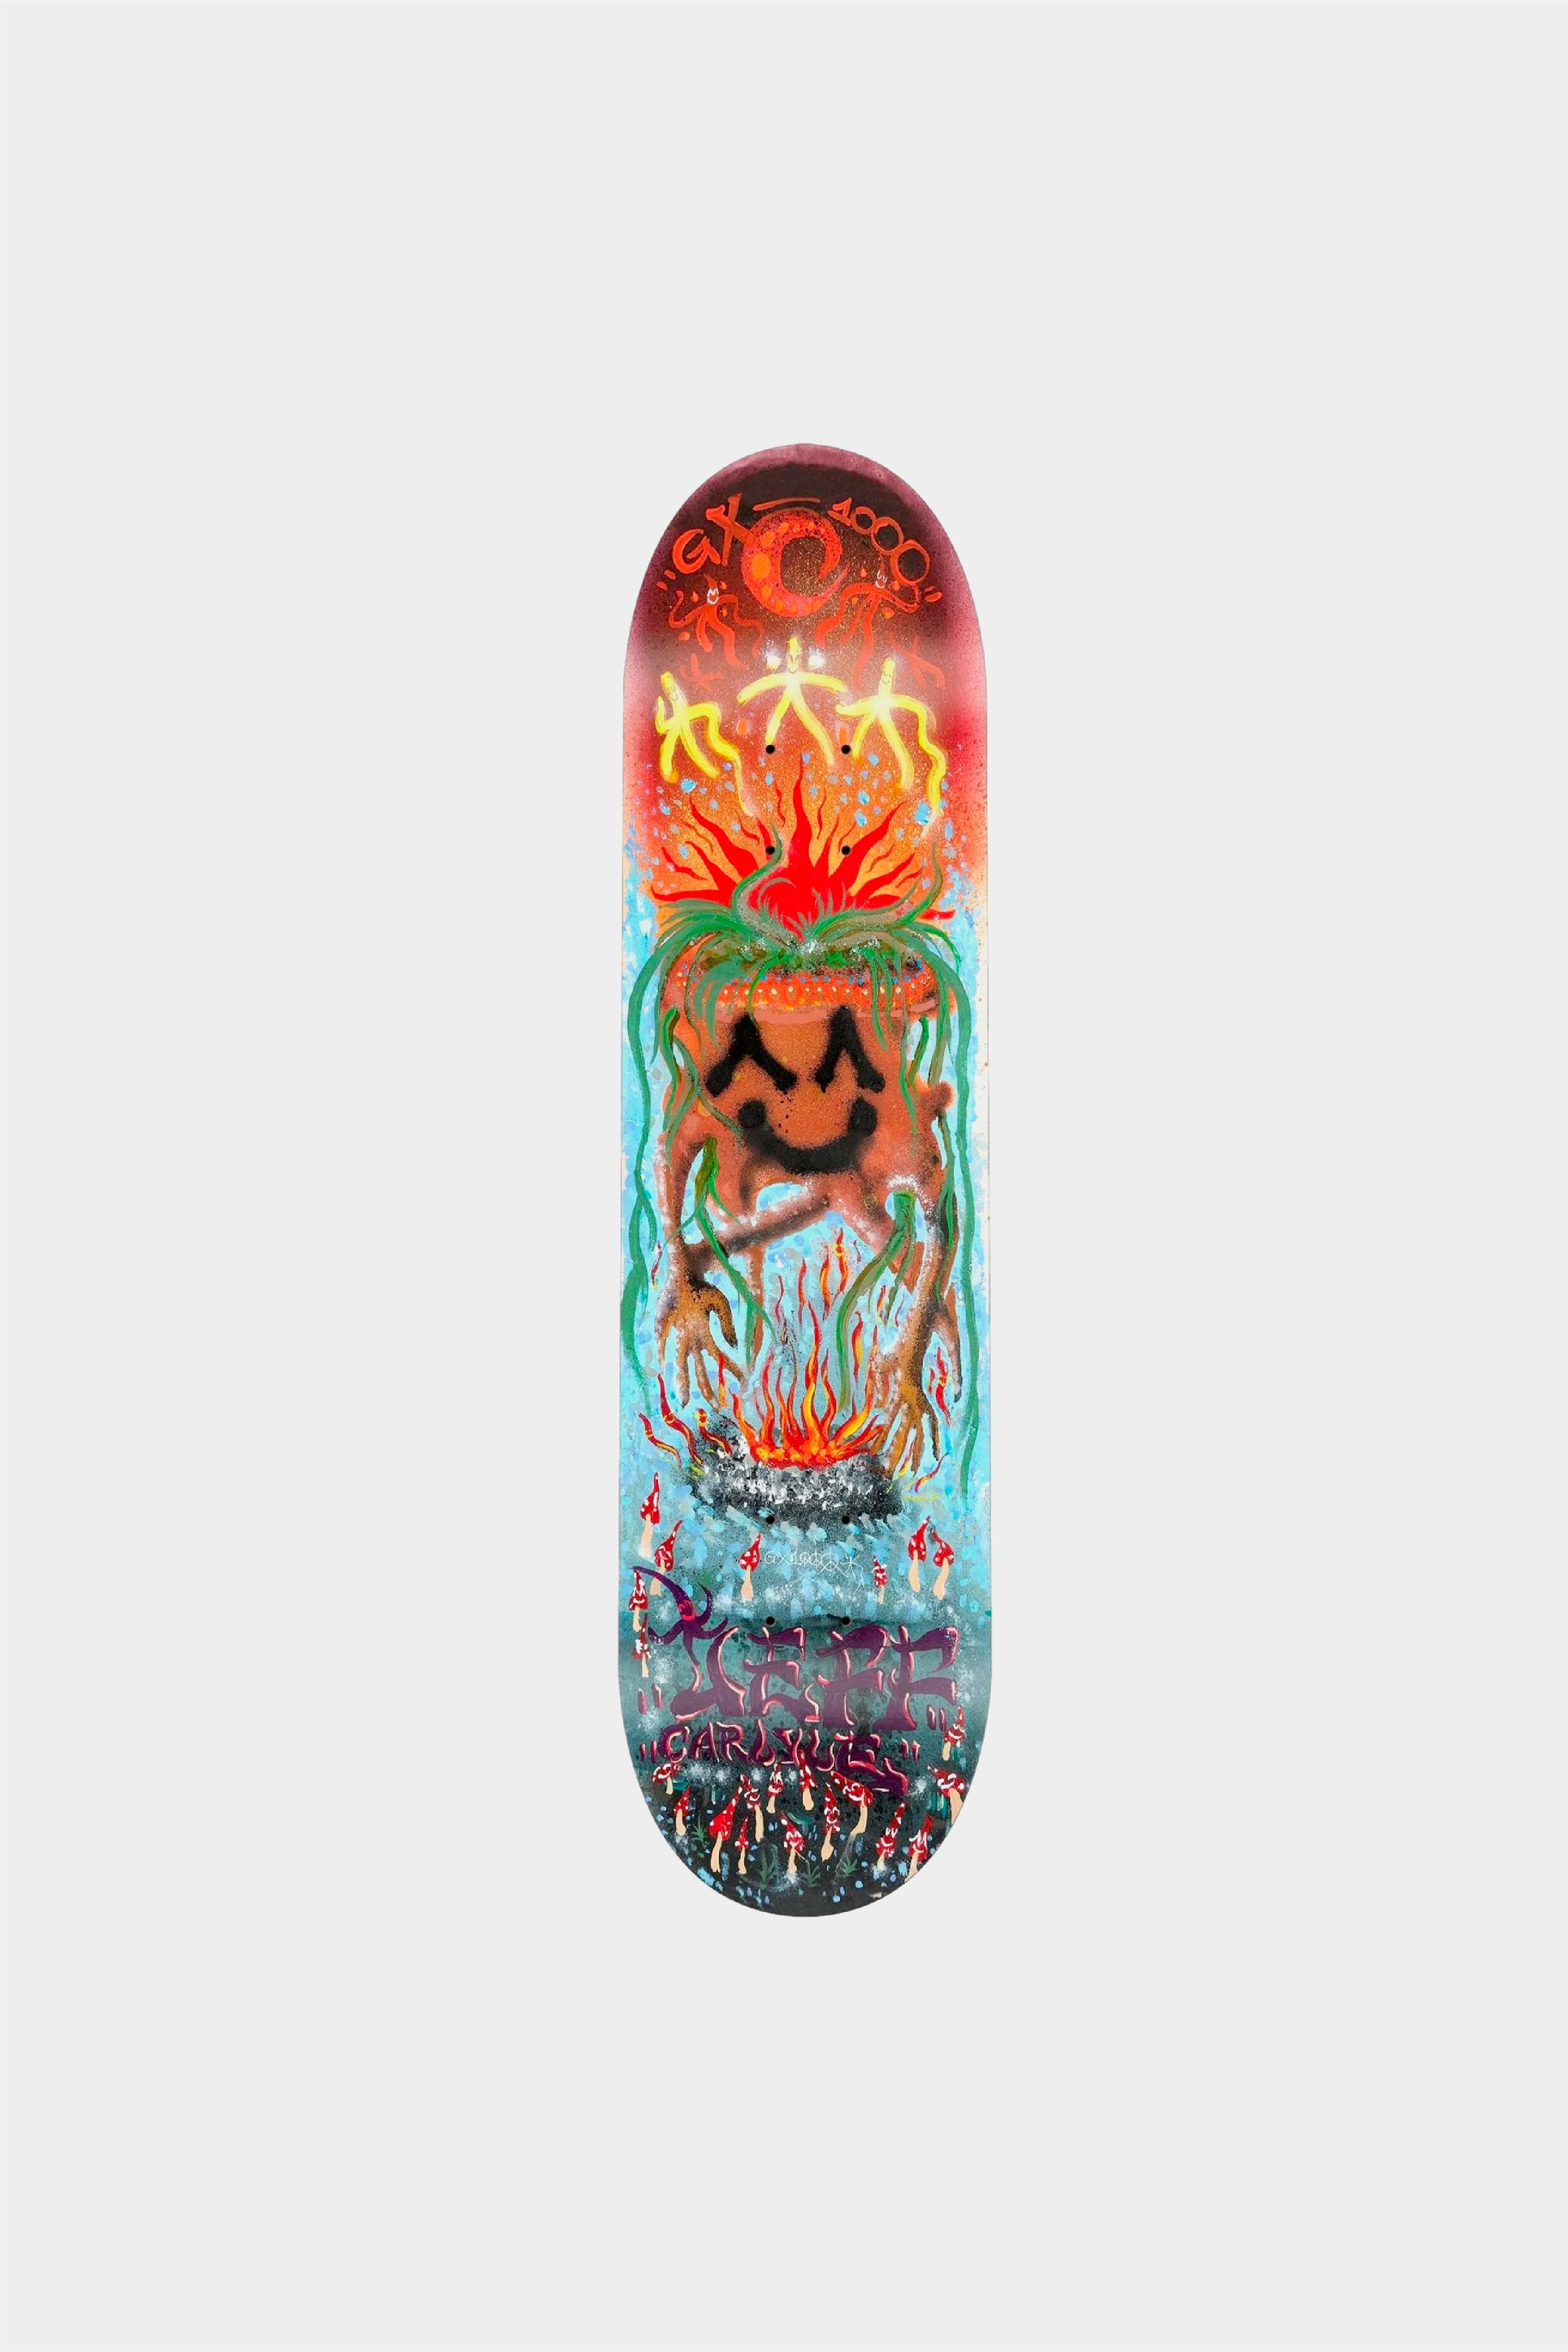 Selectshop FRAME - GX1000 Bring Me To Life "Carlyle" Deck Skateboards Concept Store Dubai